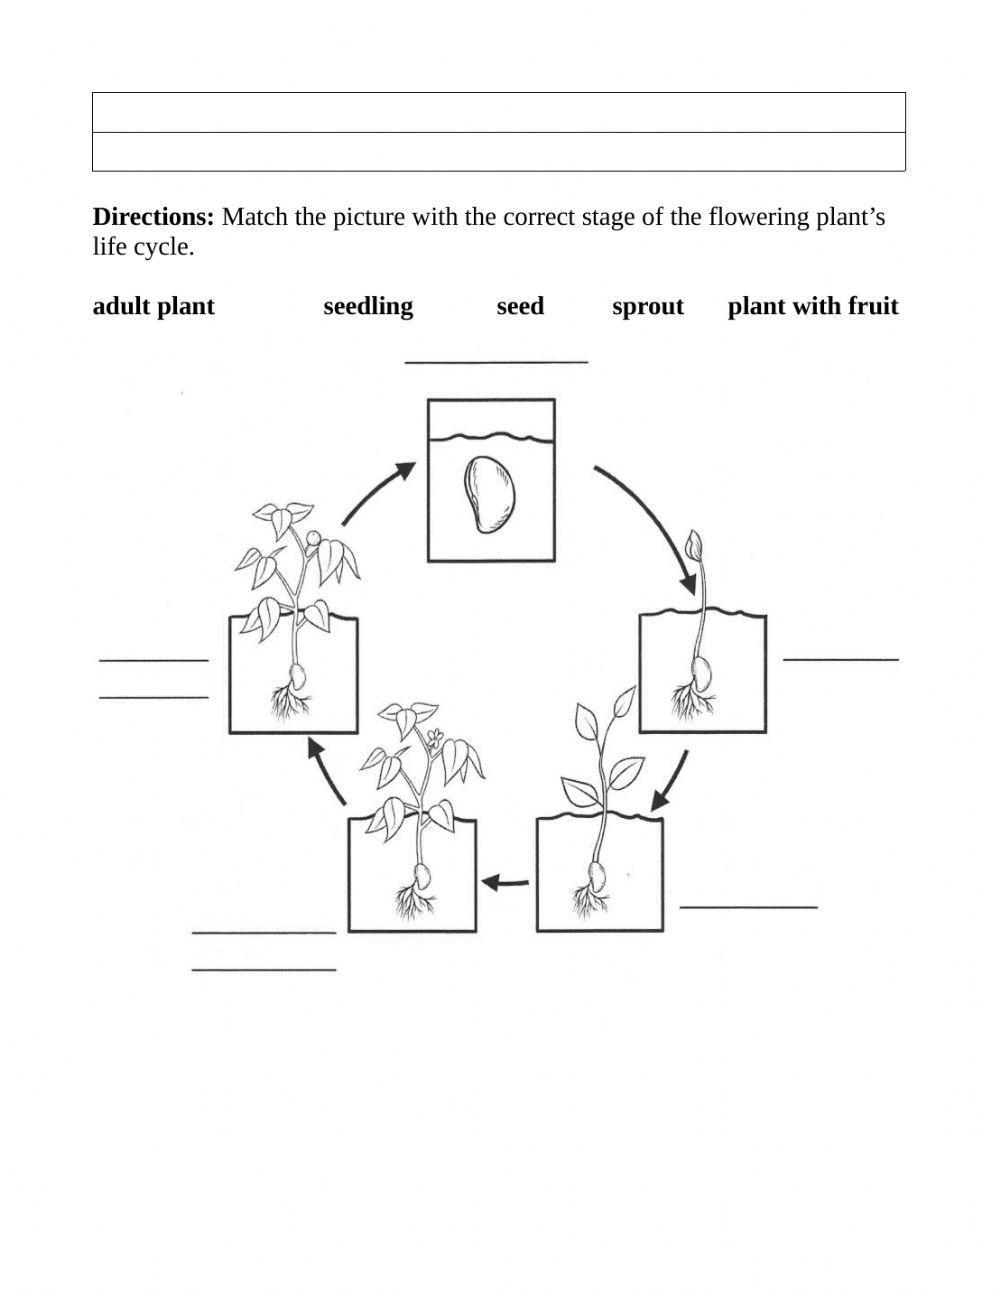 Life Cycle of a flowering plant